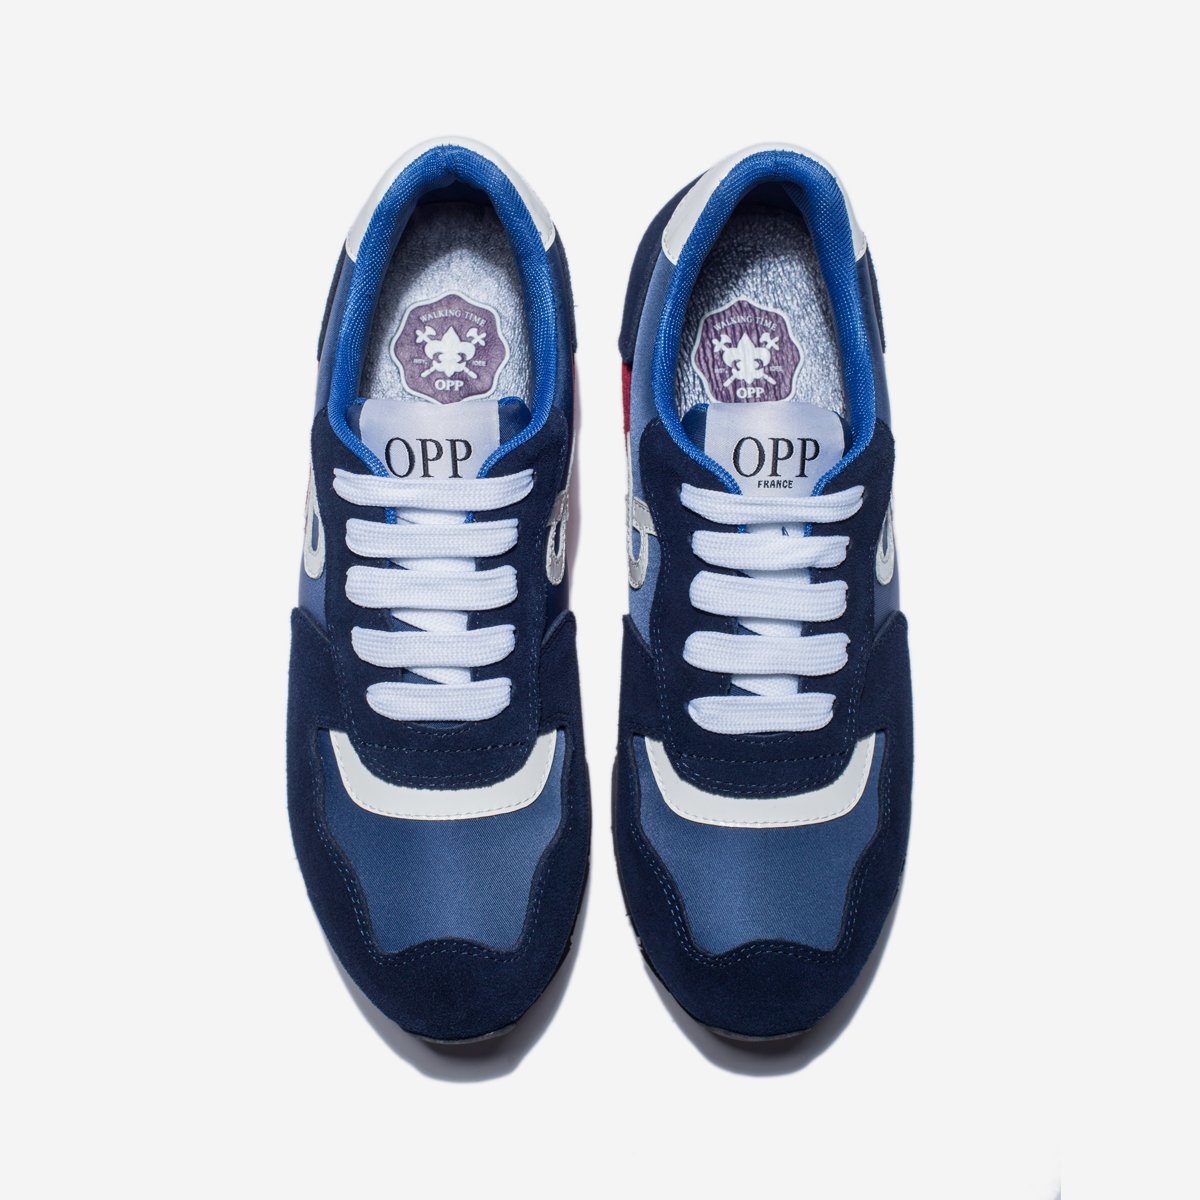 Women Lace-Up Suede Sneakers Blue - OPP Fashion